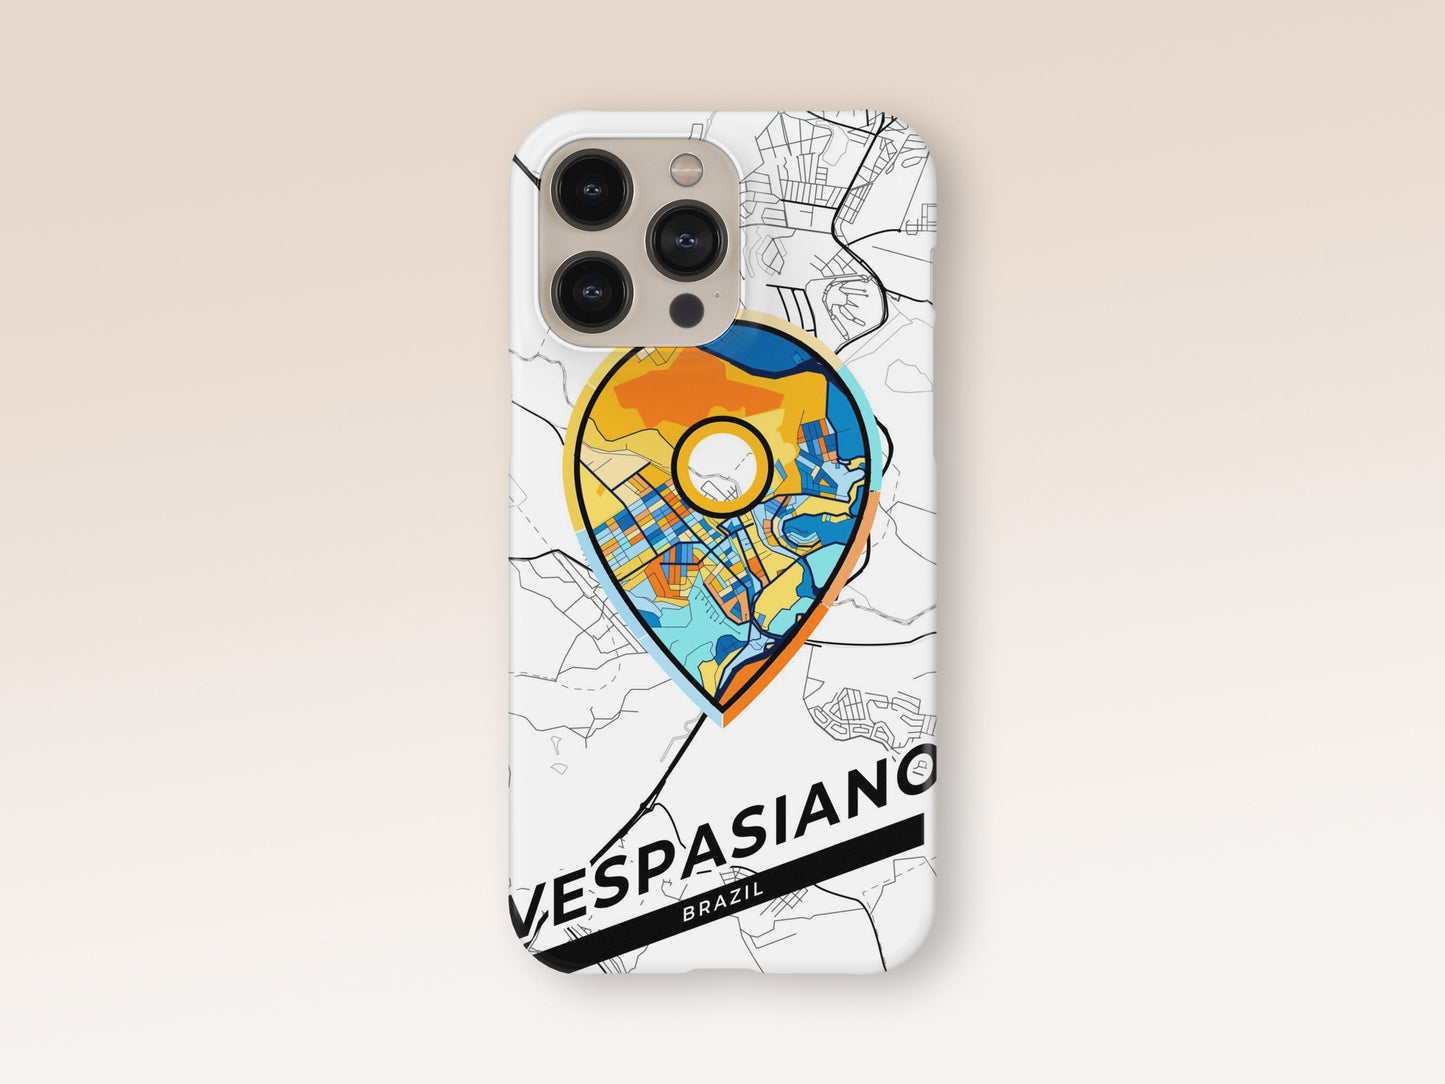 Vespasiano Brazil slim phone case with colorful icon. Birthday, wedding or housewarming gift. Couple match cases. 1